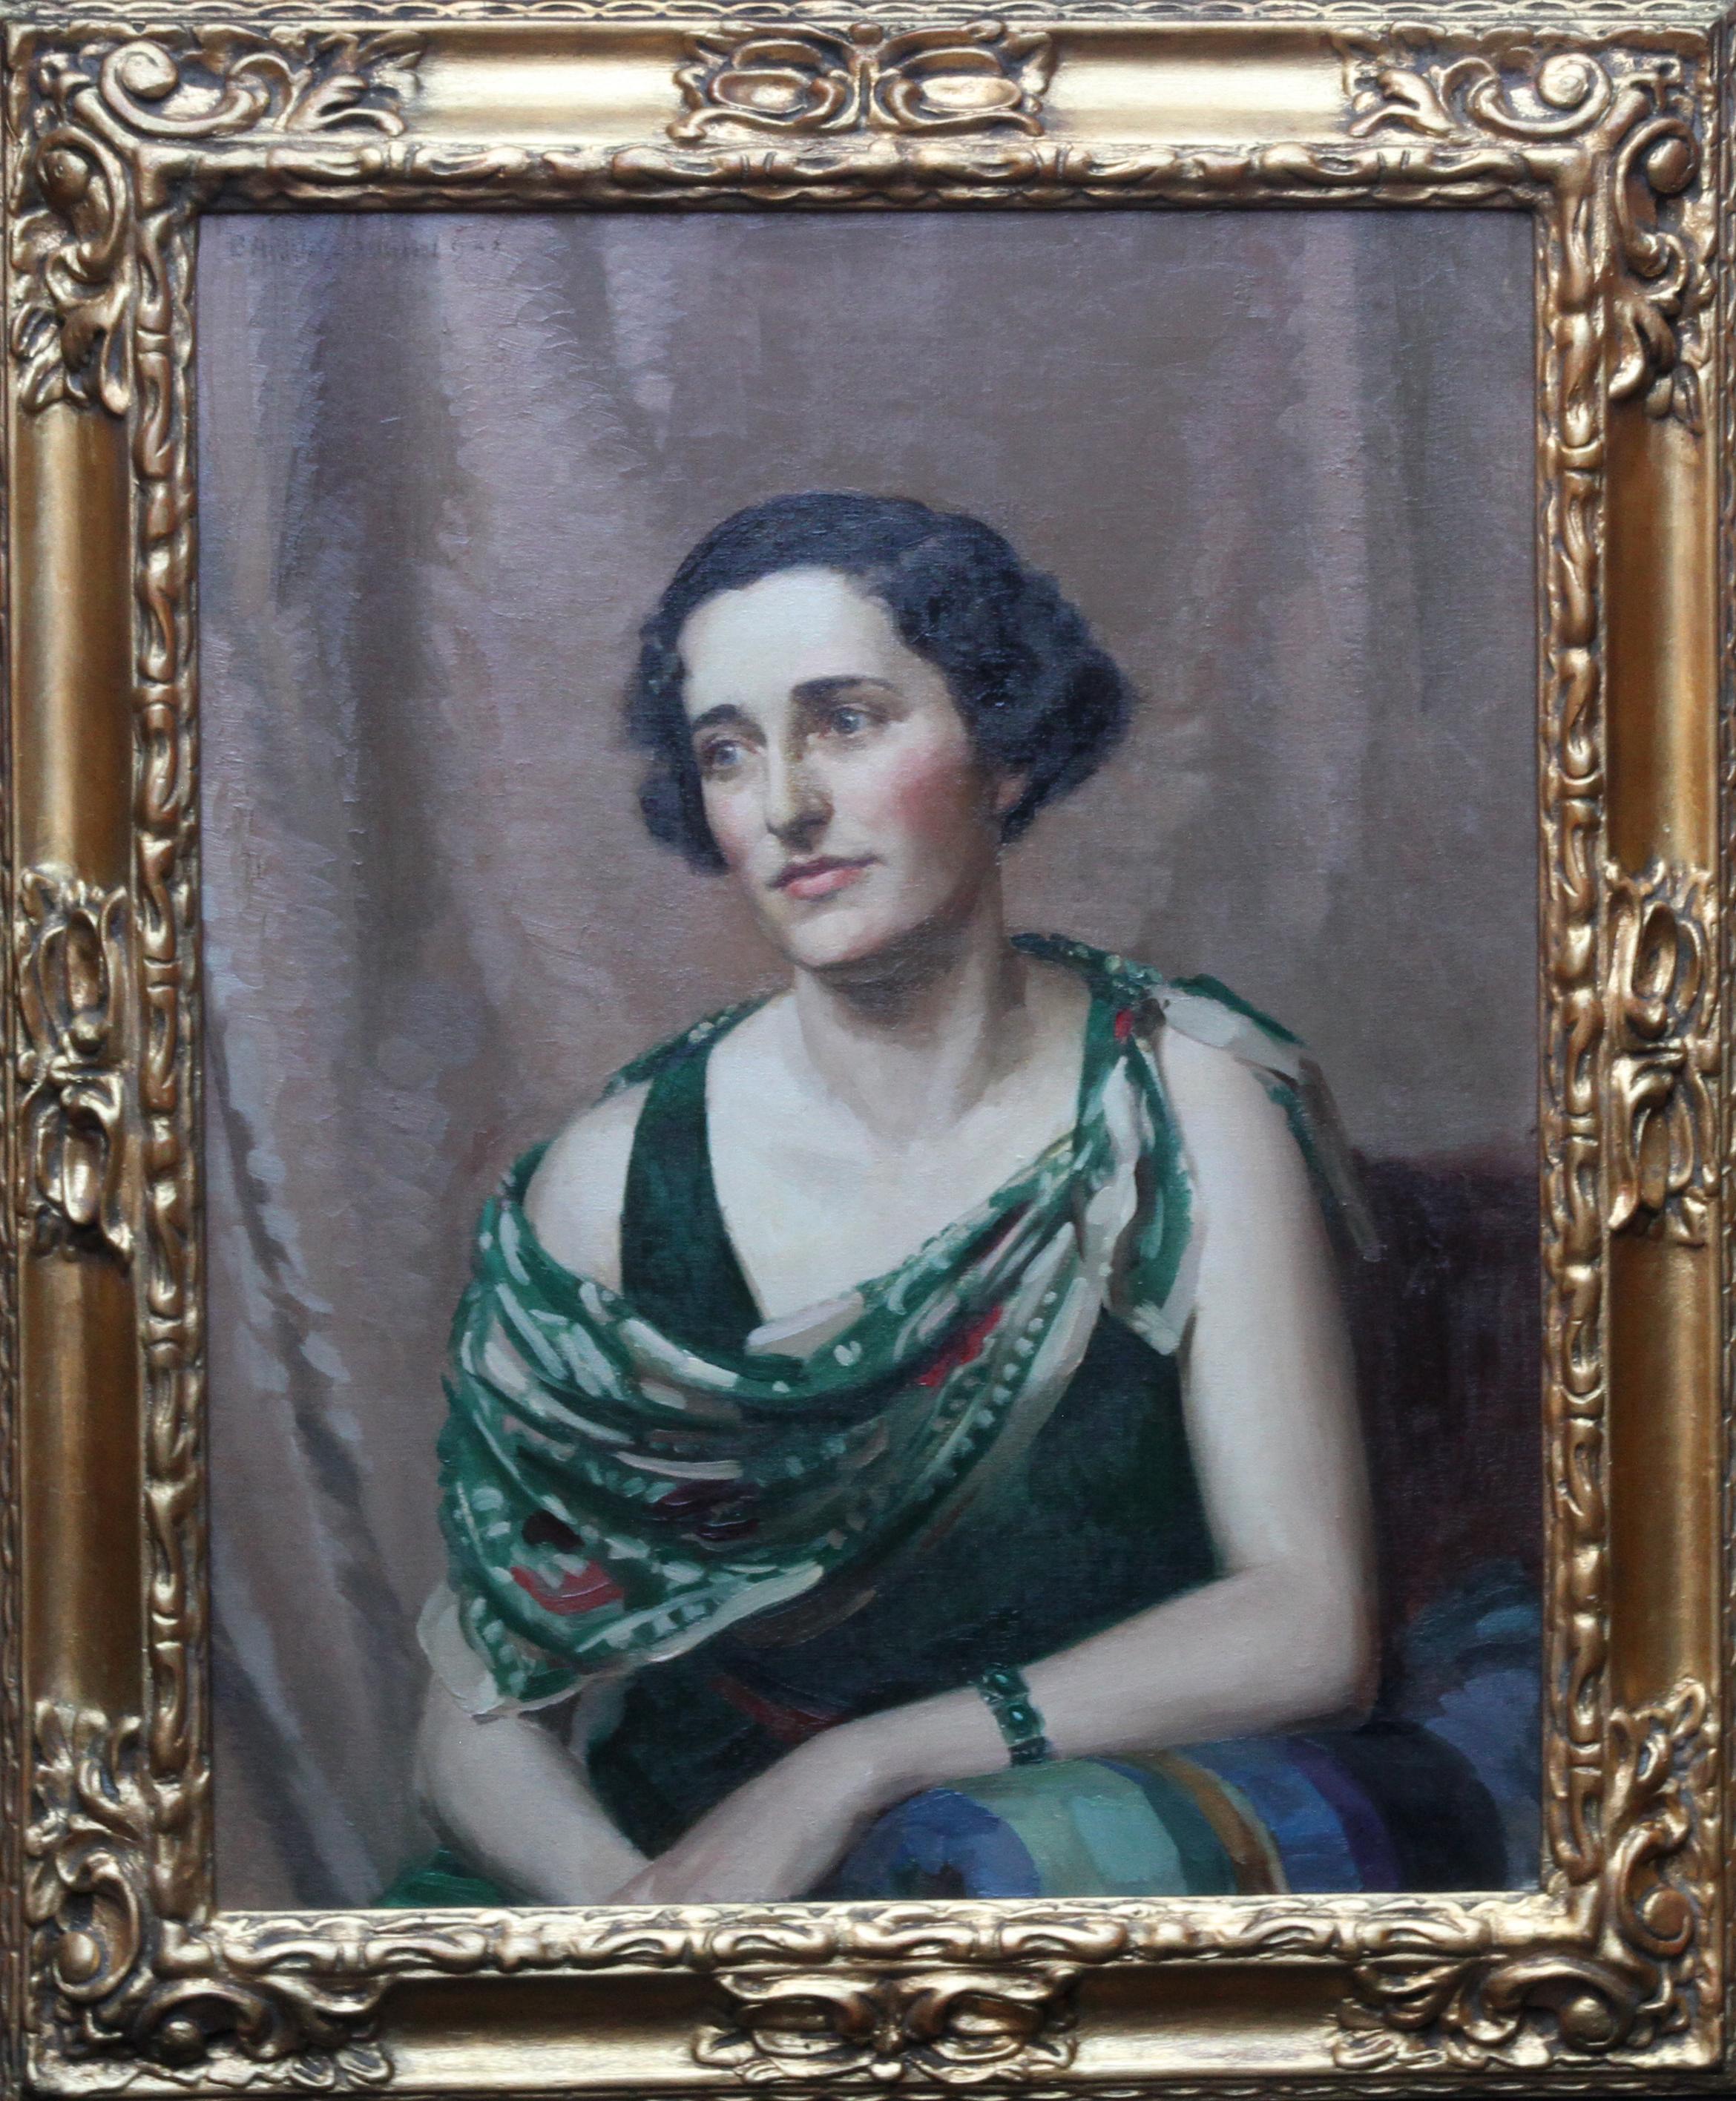 Pamela Abercromby - British Art Deco 30's portrait oil painting lady in green